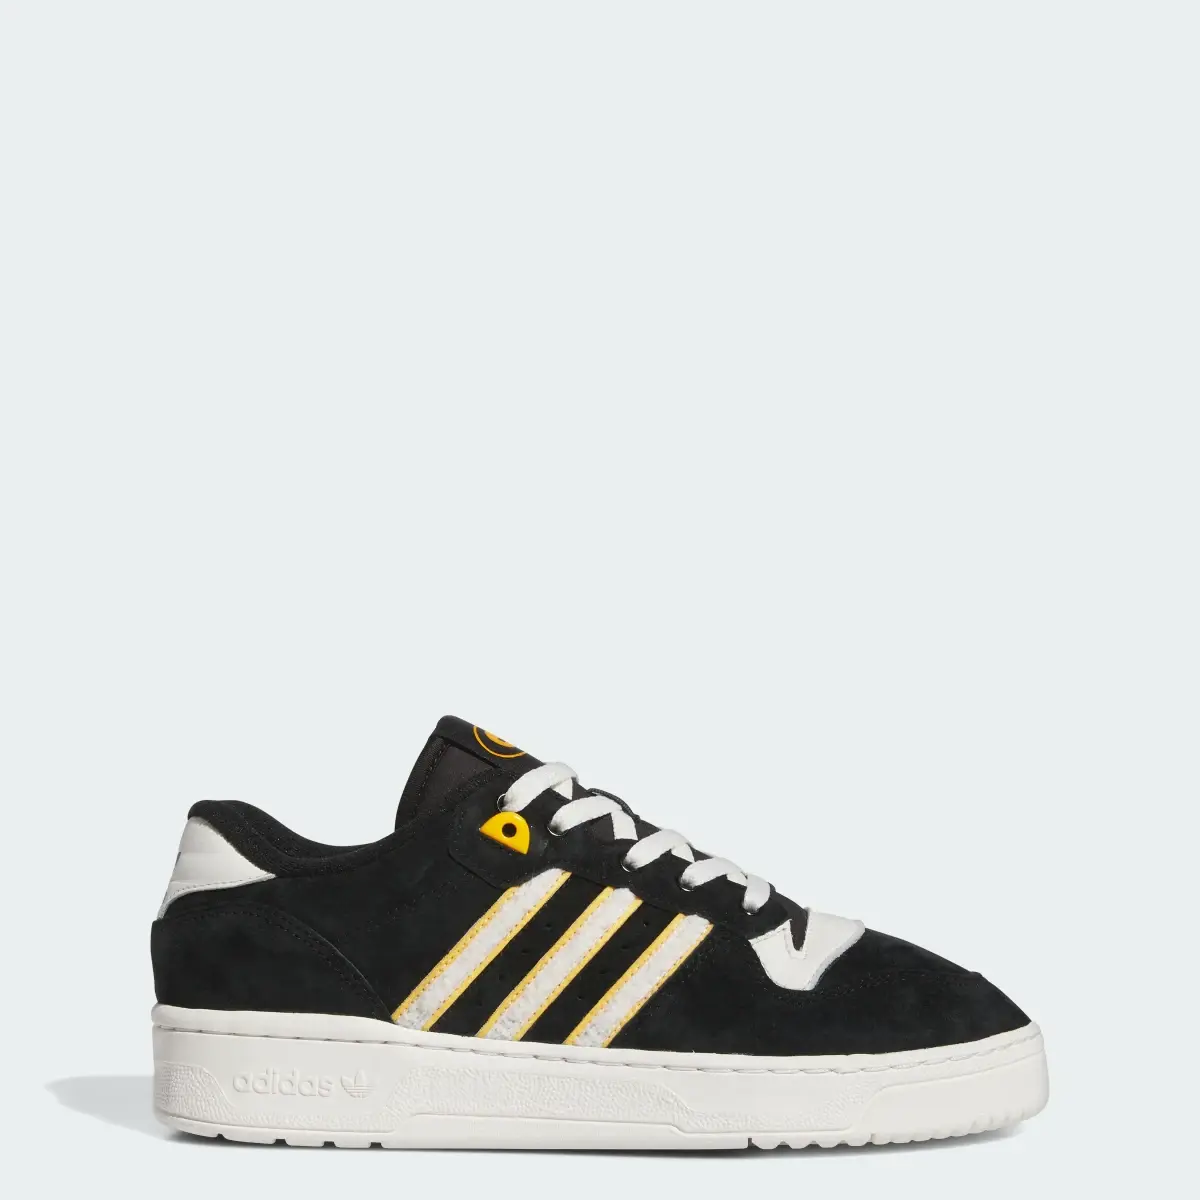 Adidas Grambling State Rivalry Low Shoes. 1